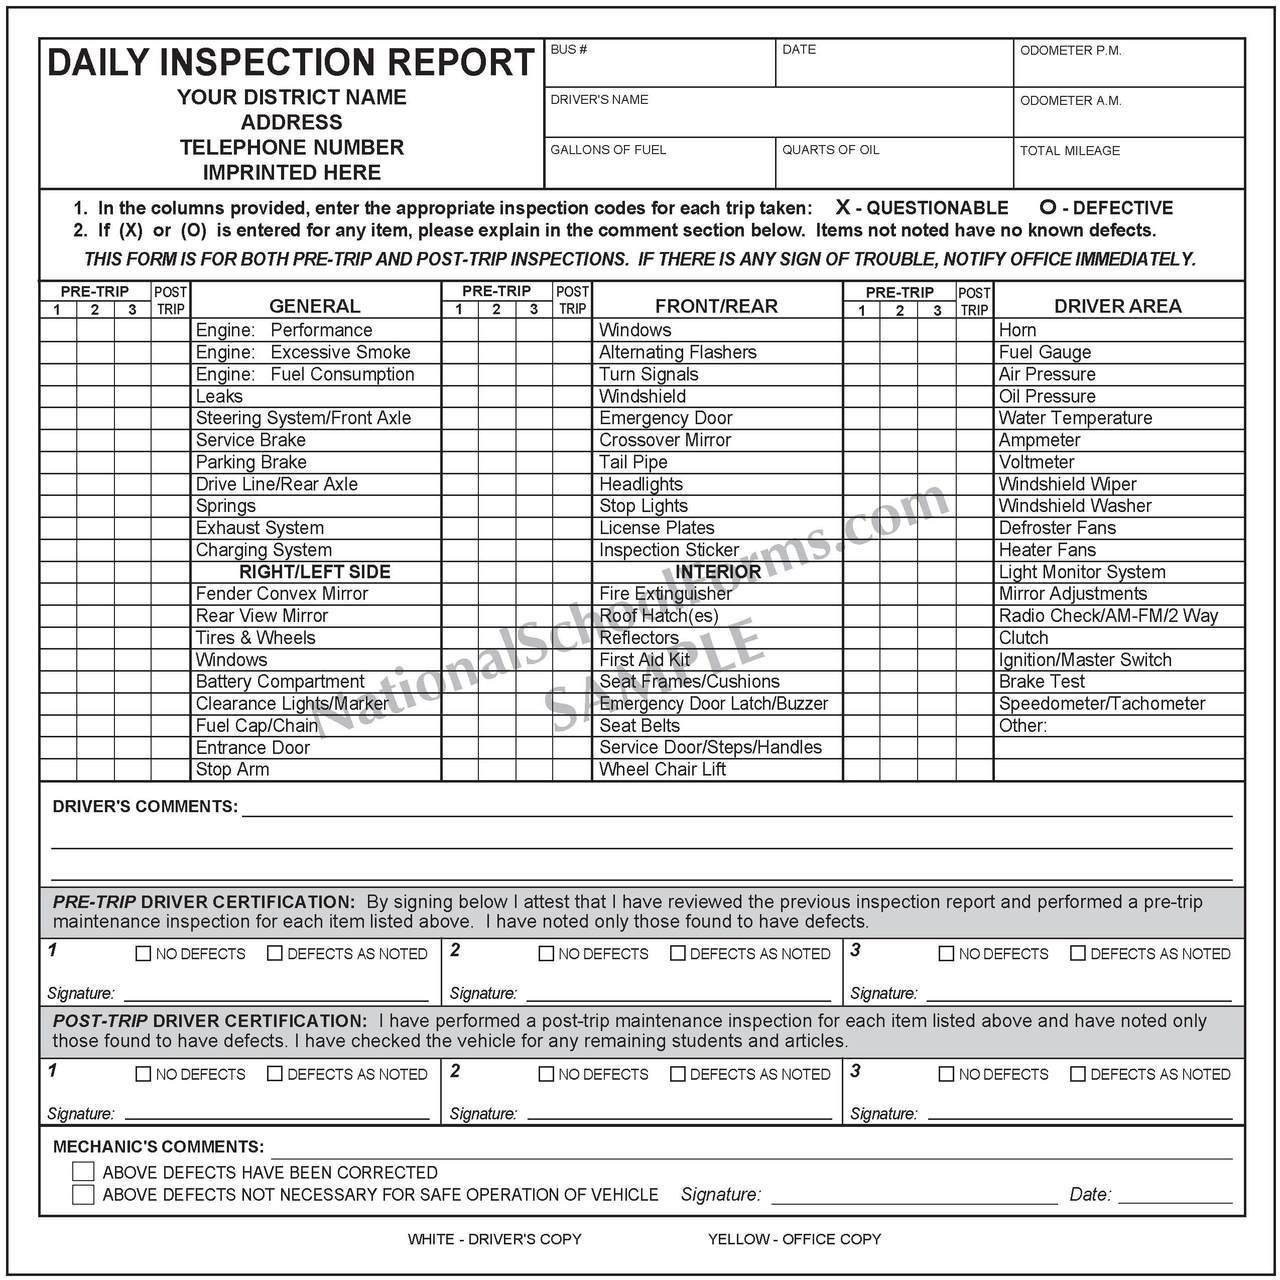 Daily Inspection Report With Pre And Post Trip | Mt Training Within Daily Inspection Report Template